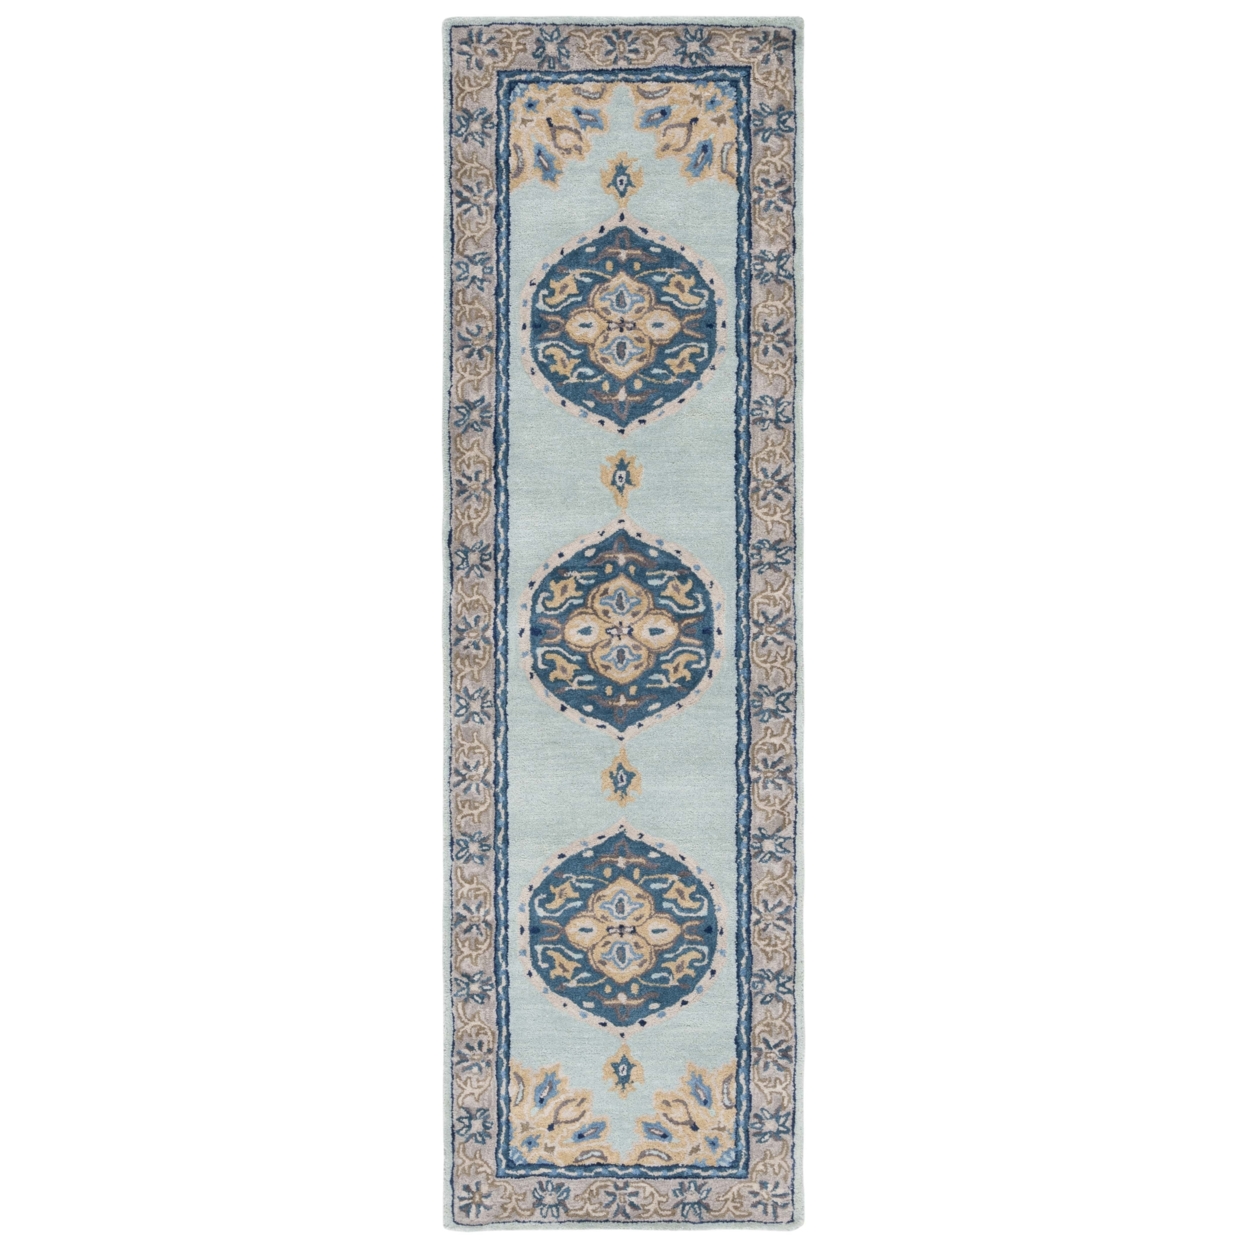 SAFAVIEH AT66K Antiquity Turquoise / Silver - 6' Square